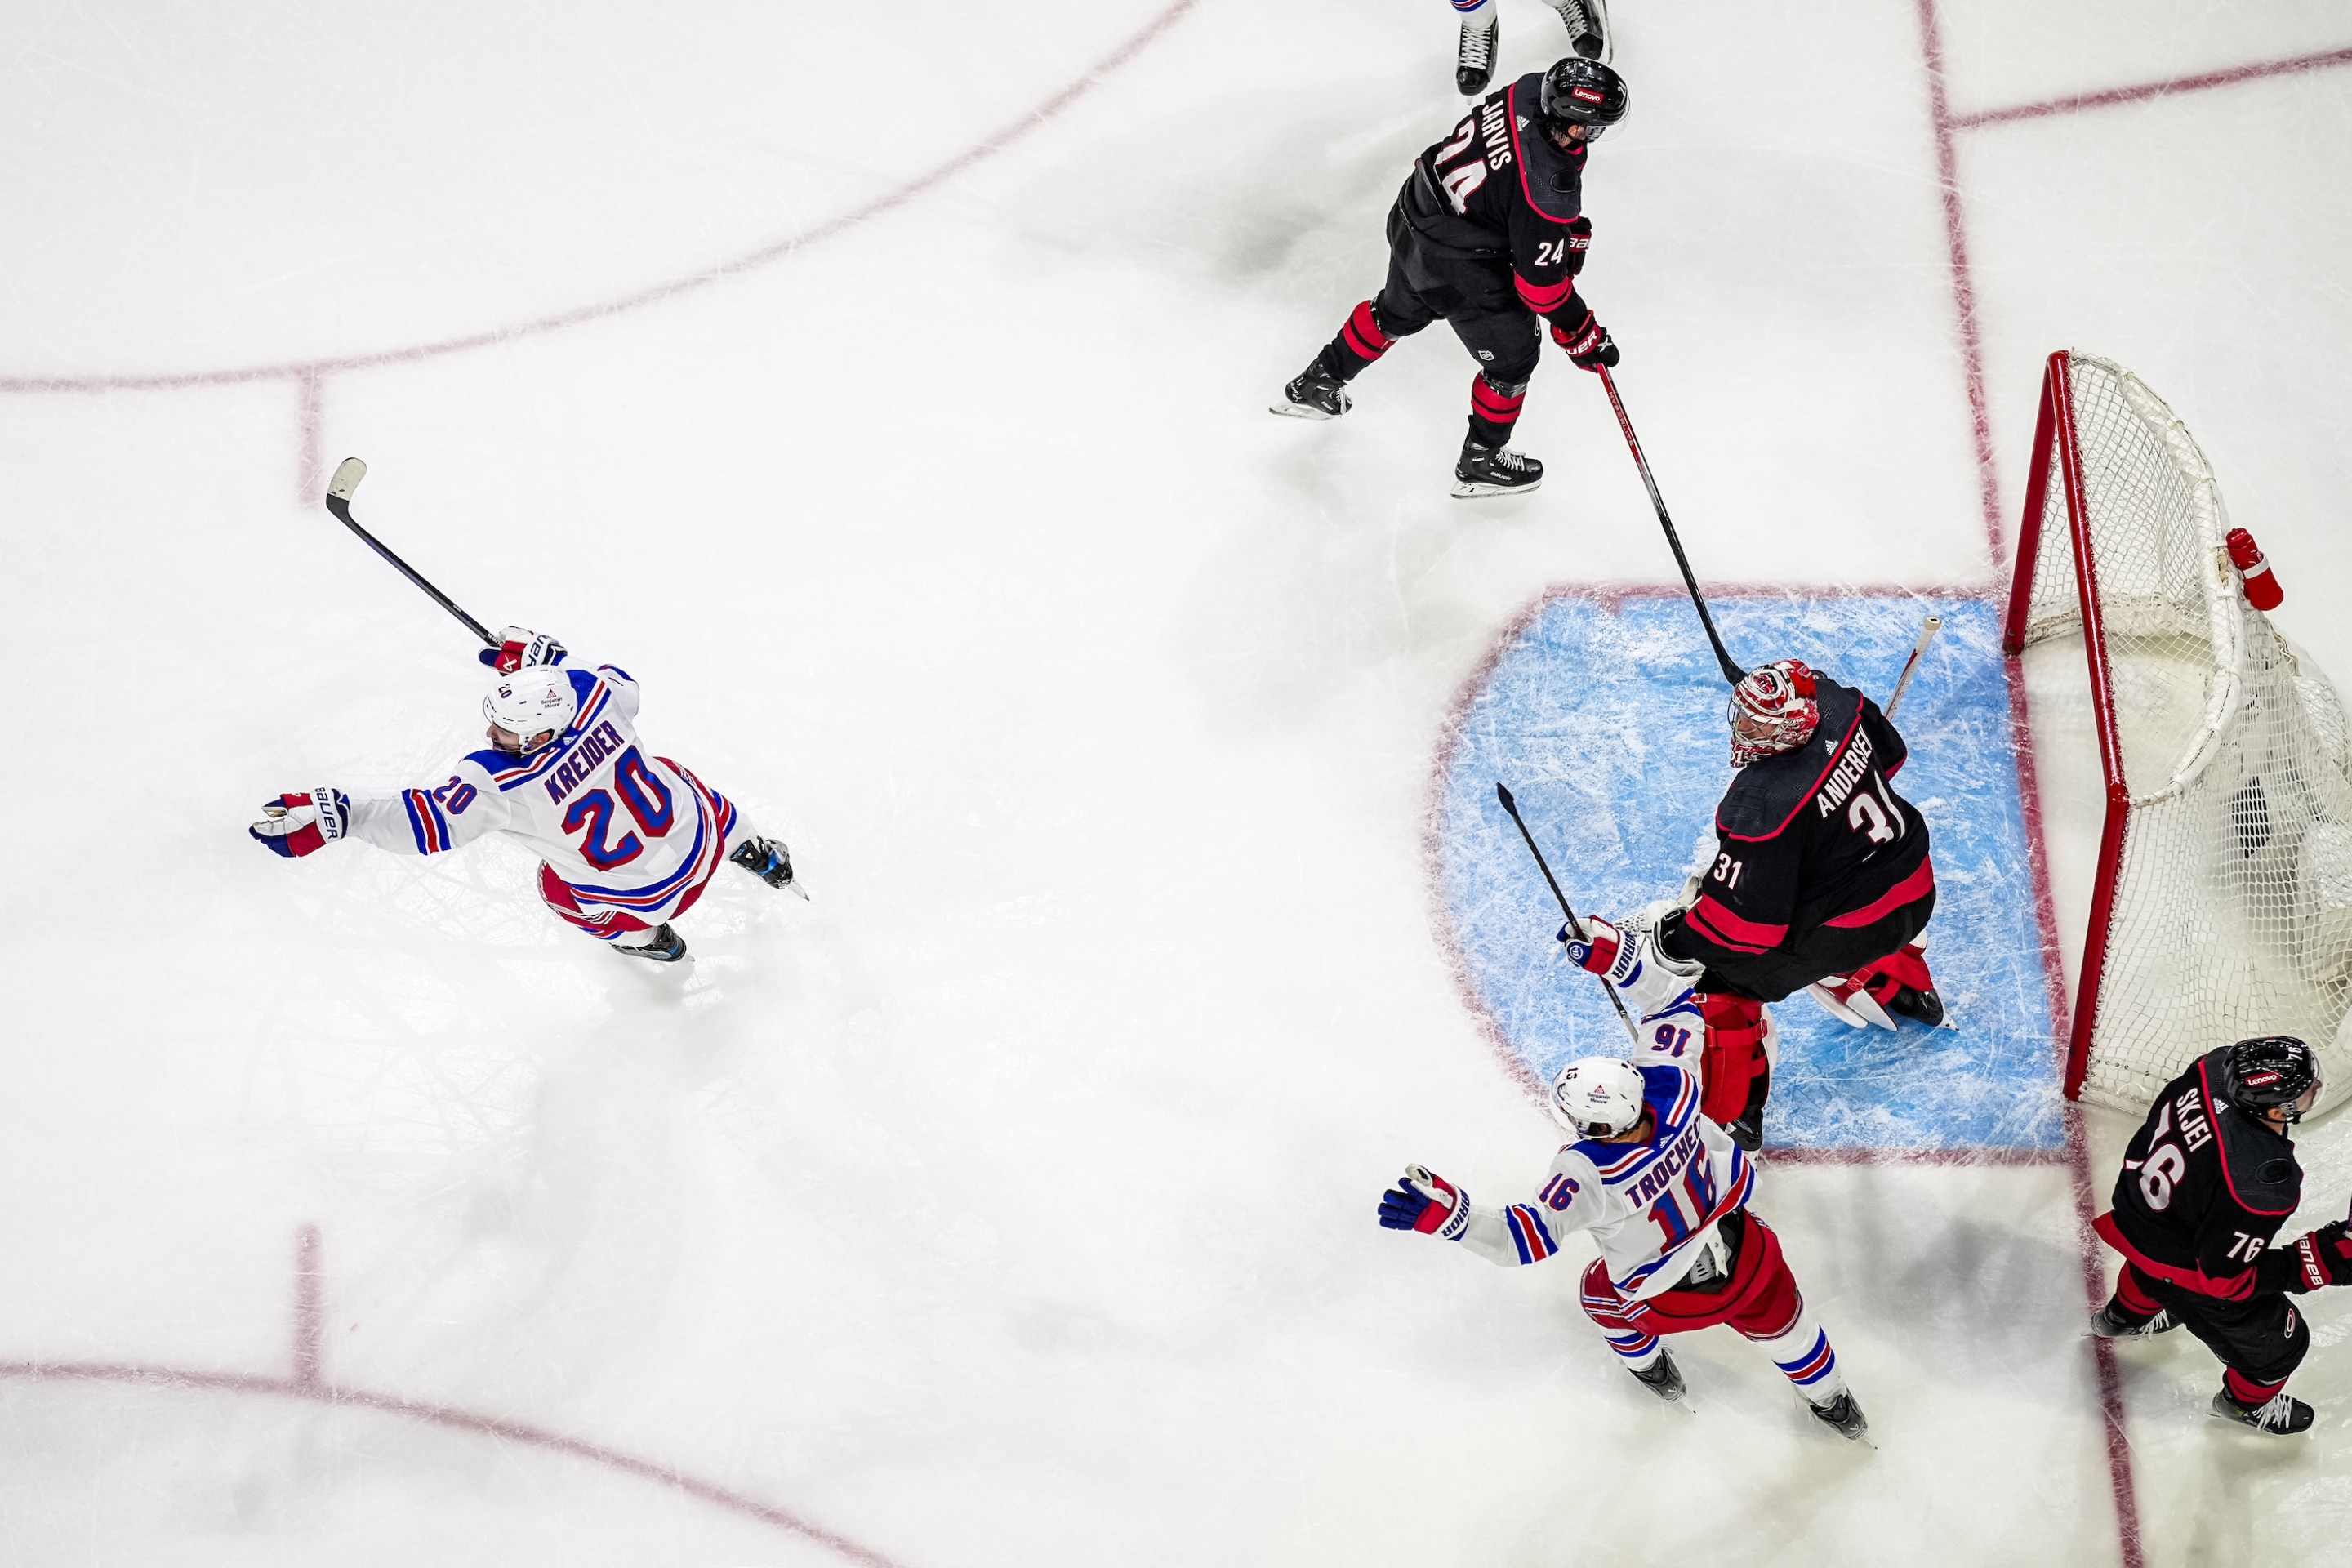 RALEIGH, NORTH CAROLINA - MAY 16: Chris Kreider #20 of the New York Rangers celebrates after scoring a goal against Frederik Andersen #31 of the Carolina Hurricanes during the third period in Game Six of the Second Round of the 2024 Stanley Cup Playoffs at PNC Arena on May 16, 2024 in Raleigh, North Carolina. (Photo by Josh Lavallee/NHLI via Getty Images)